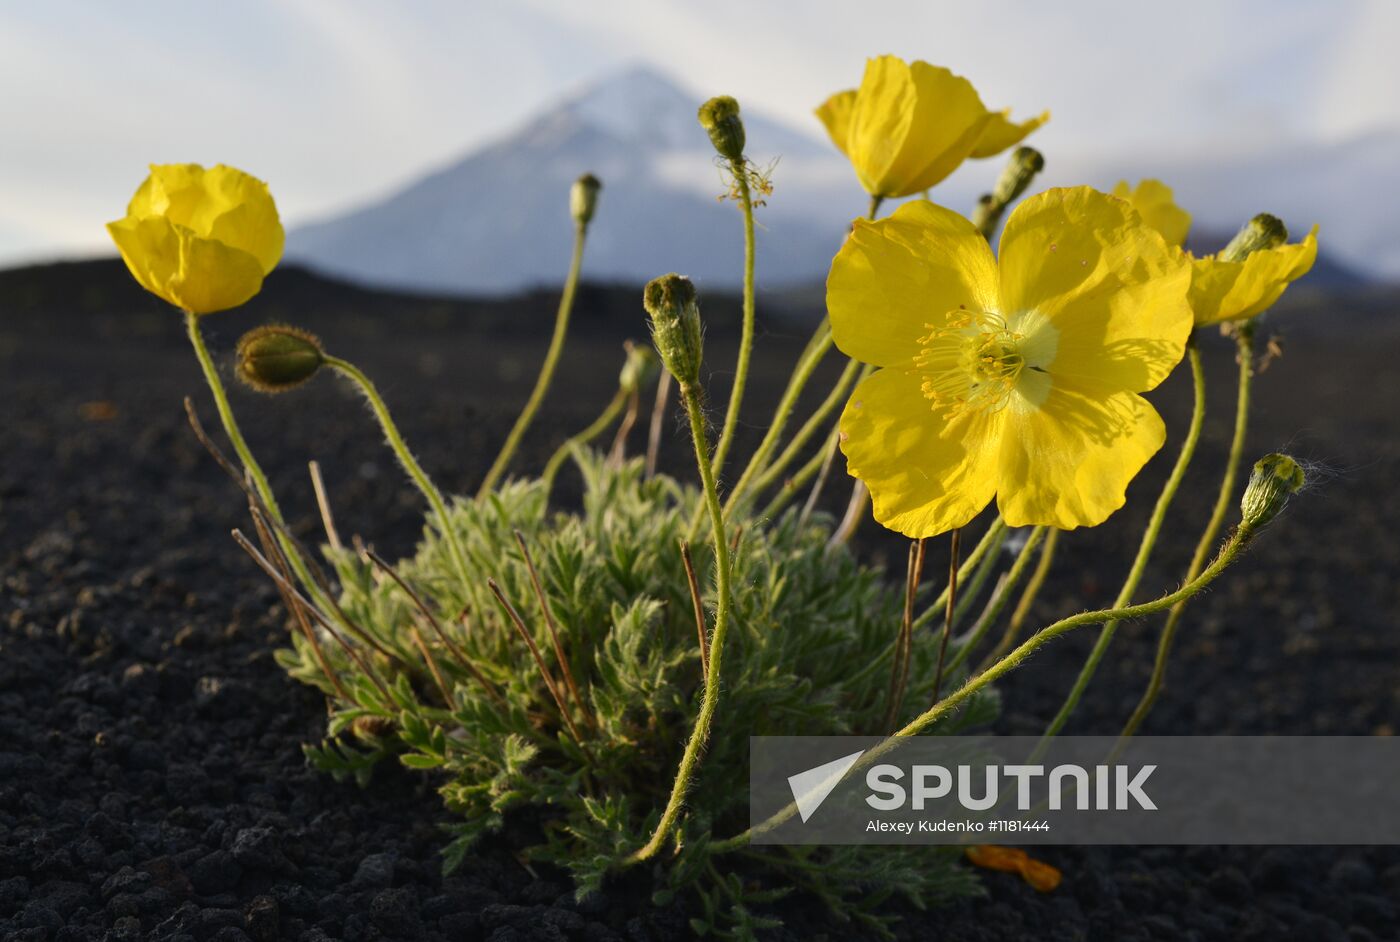 Work of volcanologists in BFTE area on Kamchatka Peninsula